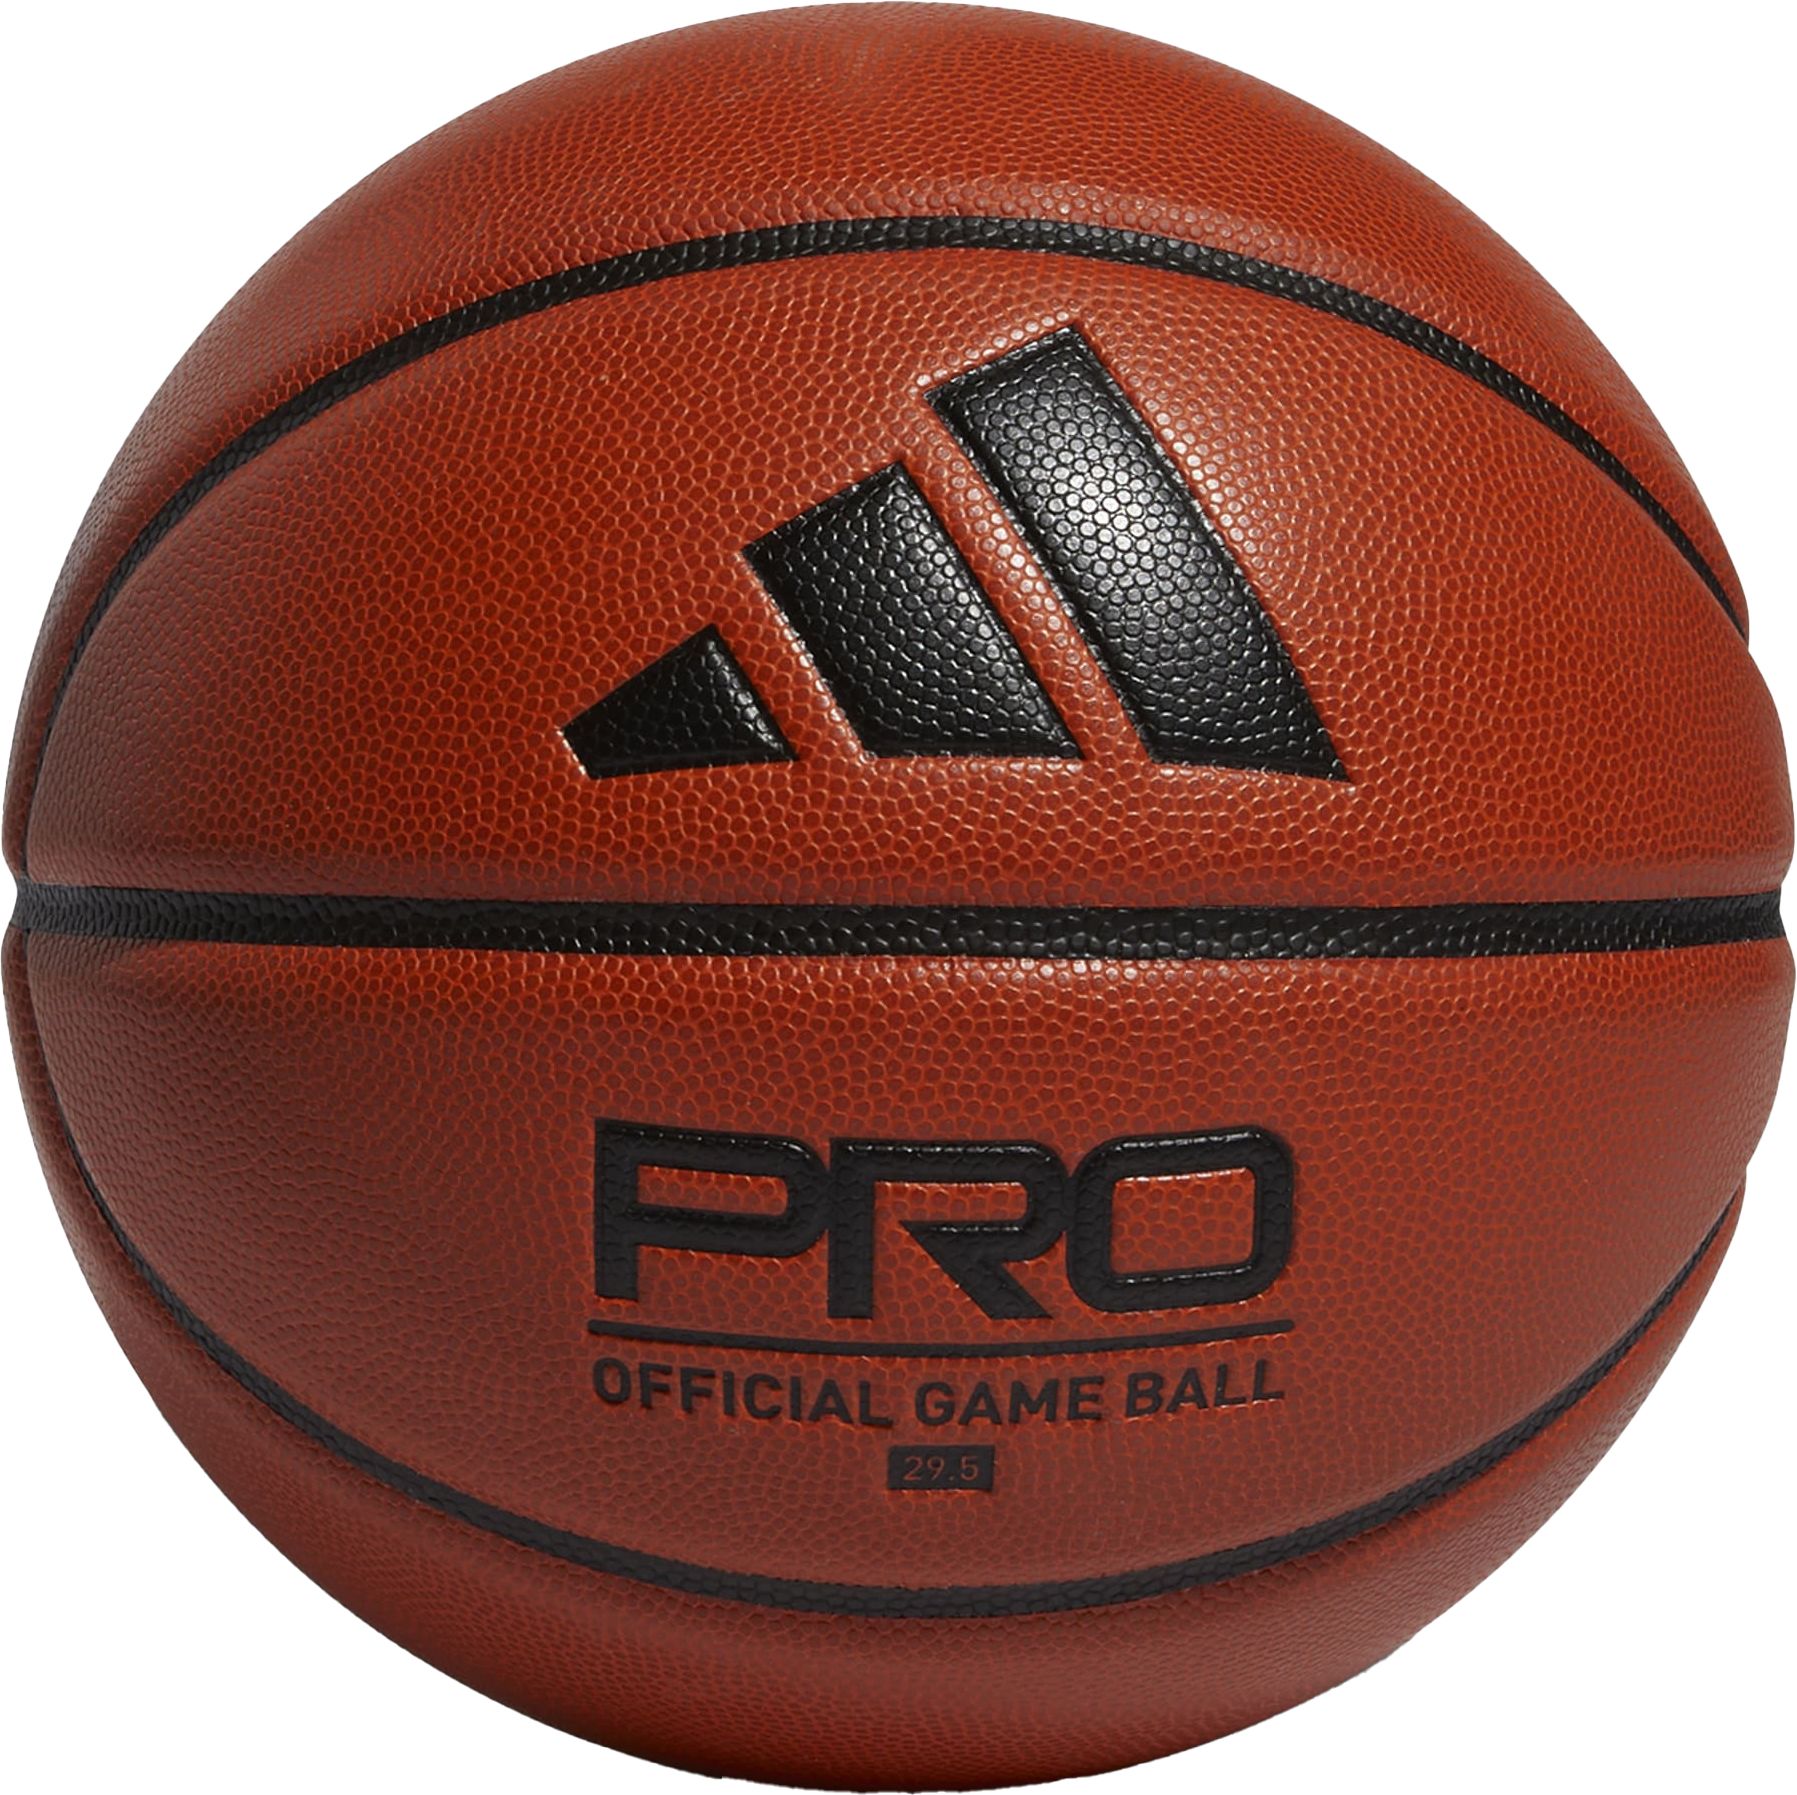 ADIDAS, Pro 3.0 Official Game Ball